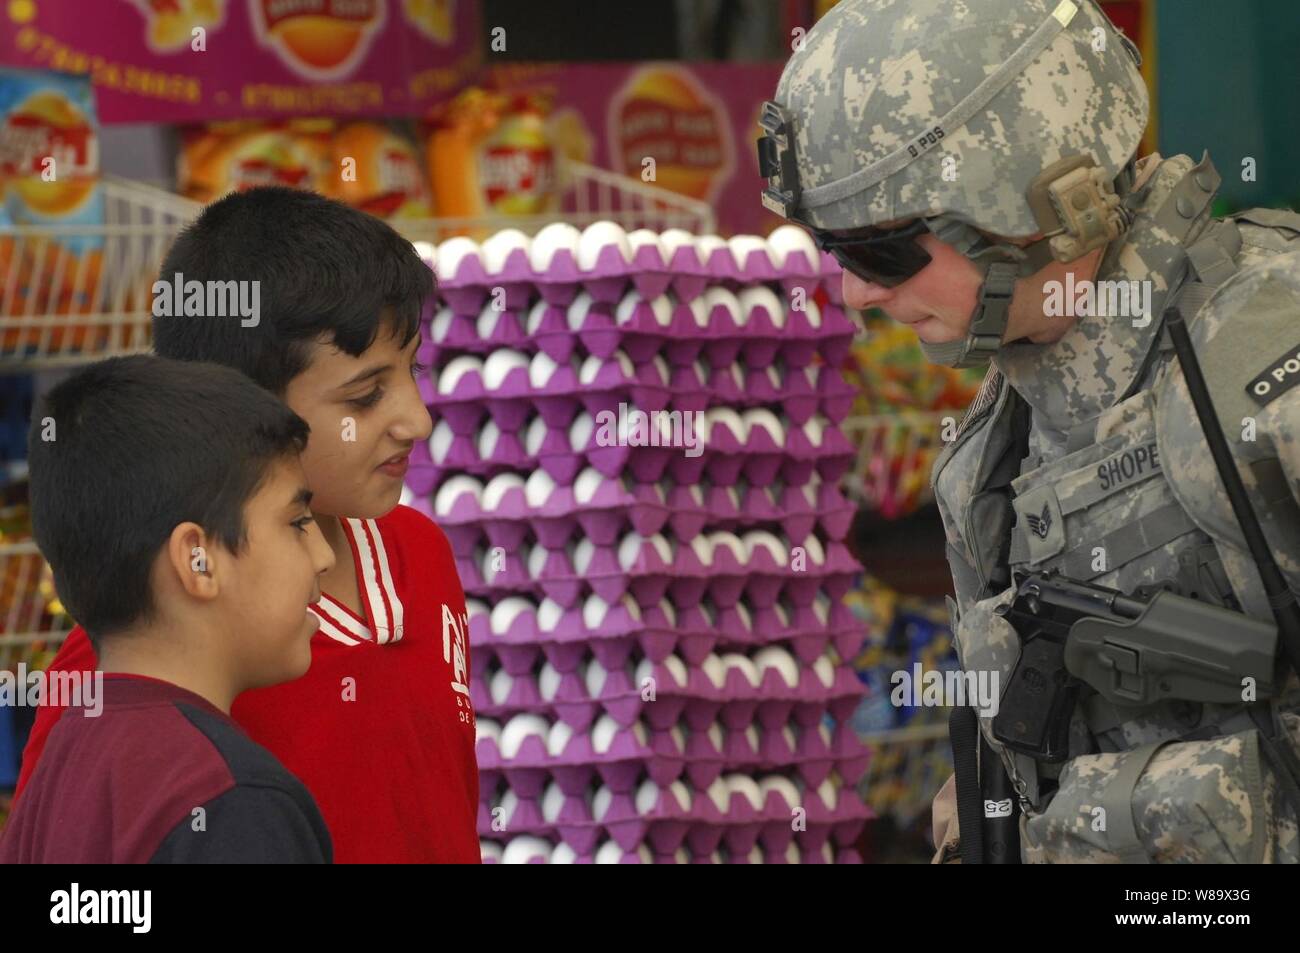 U.S. Air Force Staff Sgt. Kane Shope speaks with Iraqi children in a market during a walking patrol in the Rashid community of southern Baghdad, Iraq, on Dec. 4, 2008.  Shope is assigned to Detachment 3, 732nd Expeditionary Security Forces Squadron attached to 1st Brigade Combat Team, 4th Infantry Division. Stock Photo